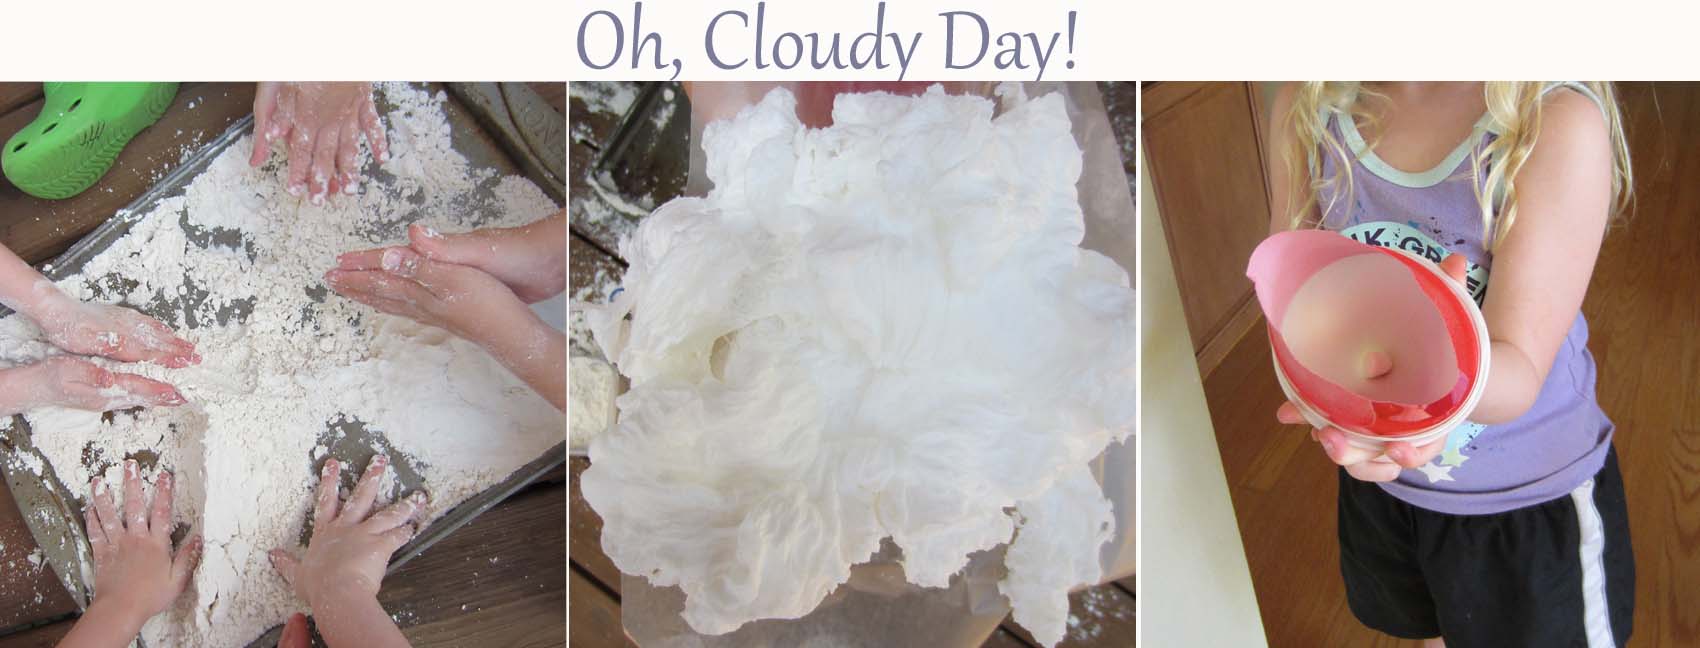 “Cloudy Day” Activities (and a few words on Pinterest)